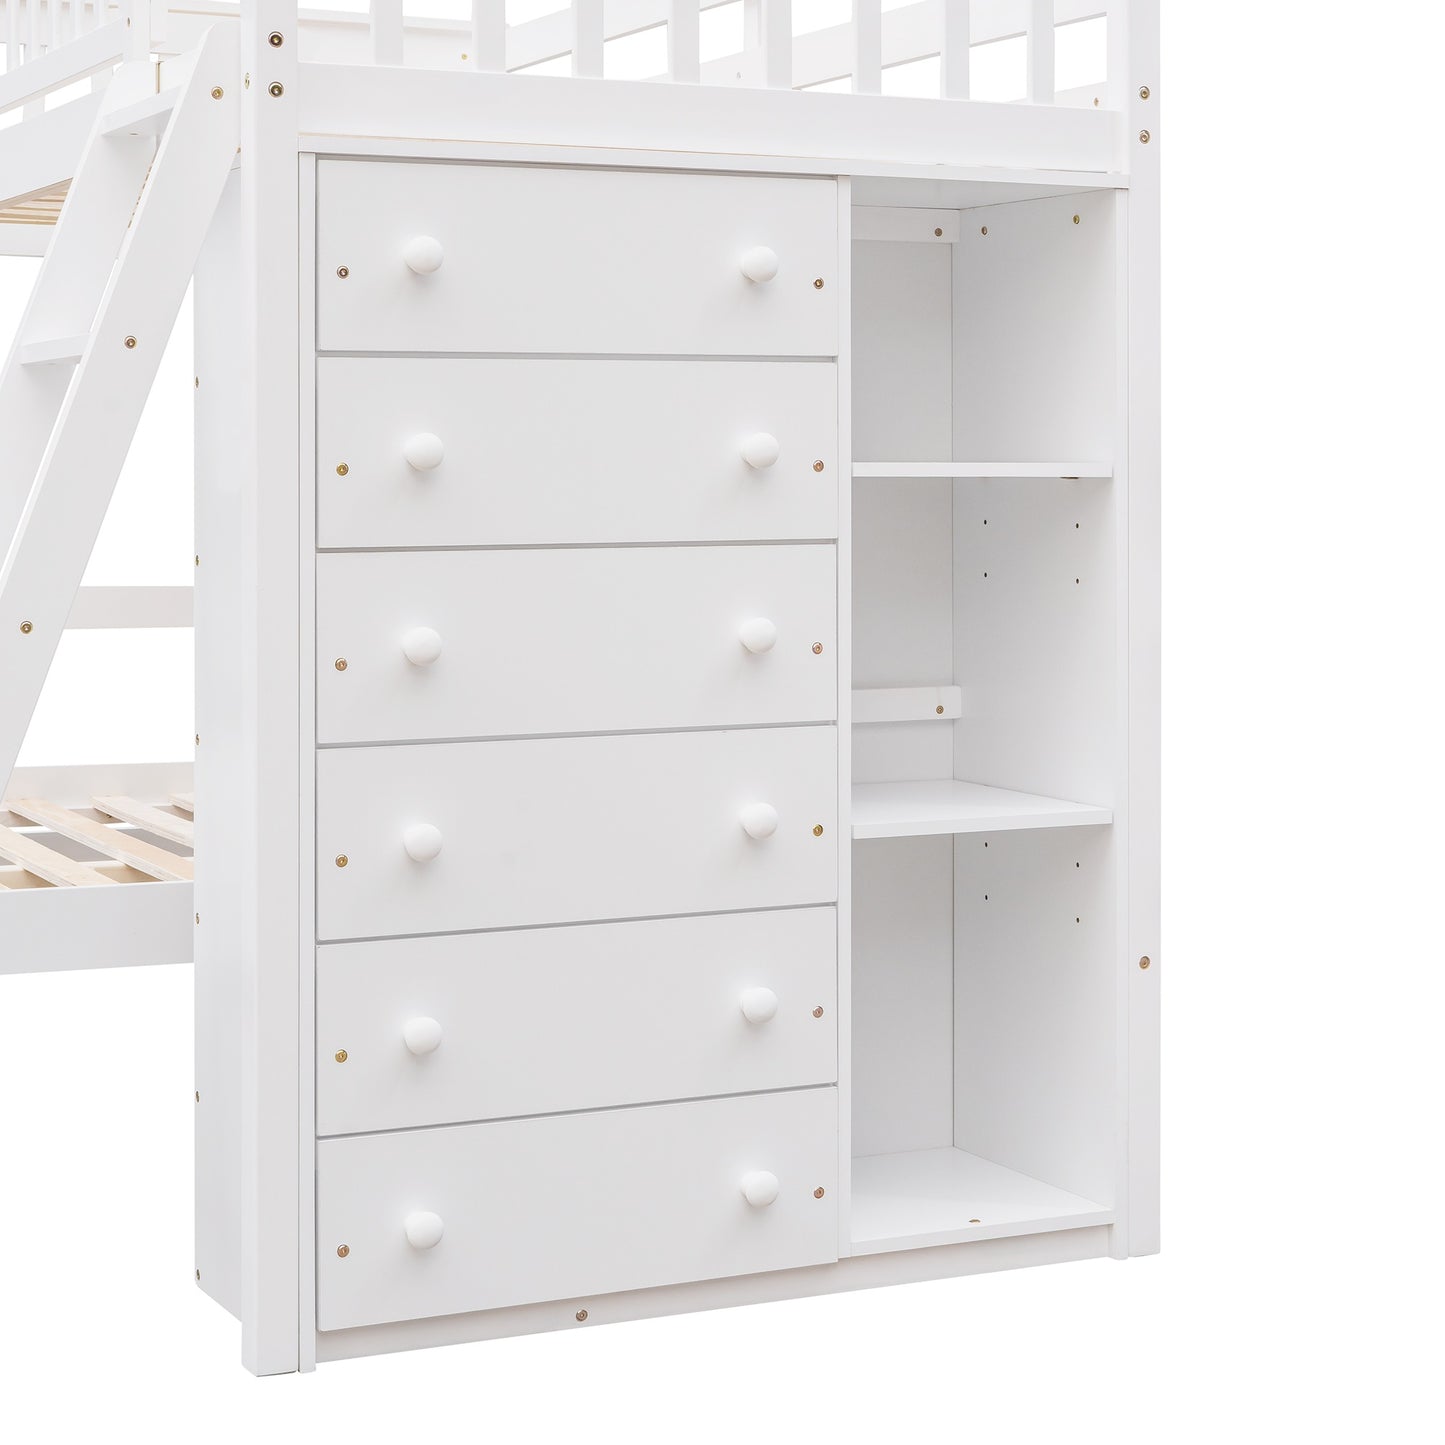 1st Choice Modern Wooden Bedroom Twin Over Full Bunk Bed in White